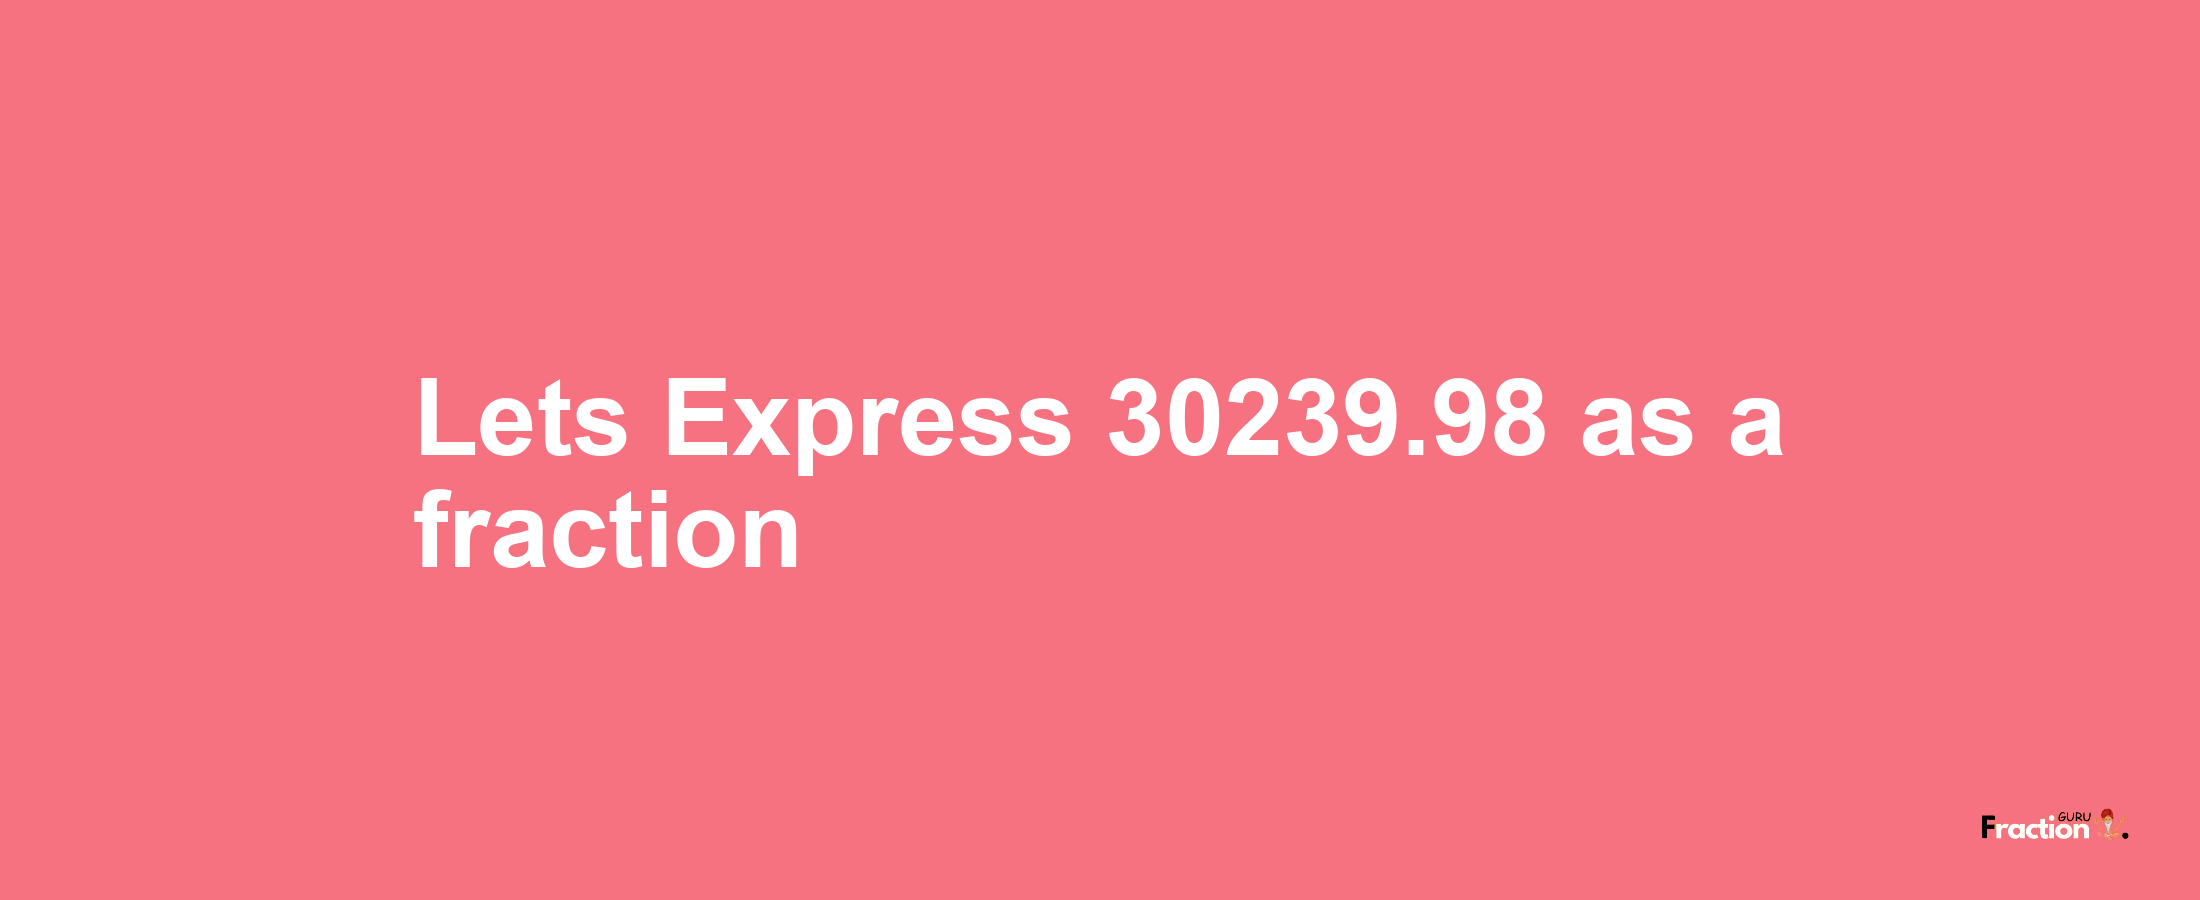 Lets Express 30239.98 as afraction